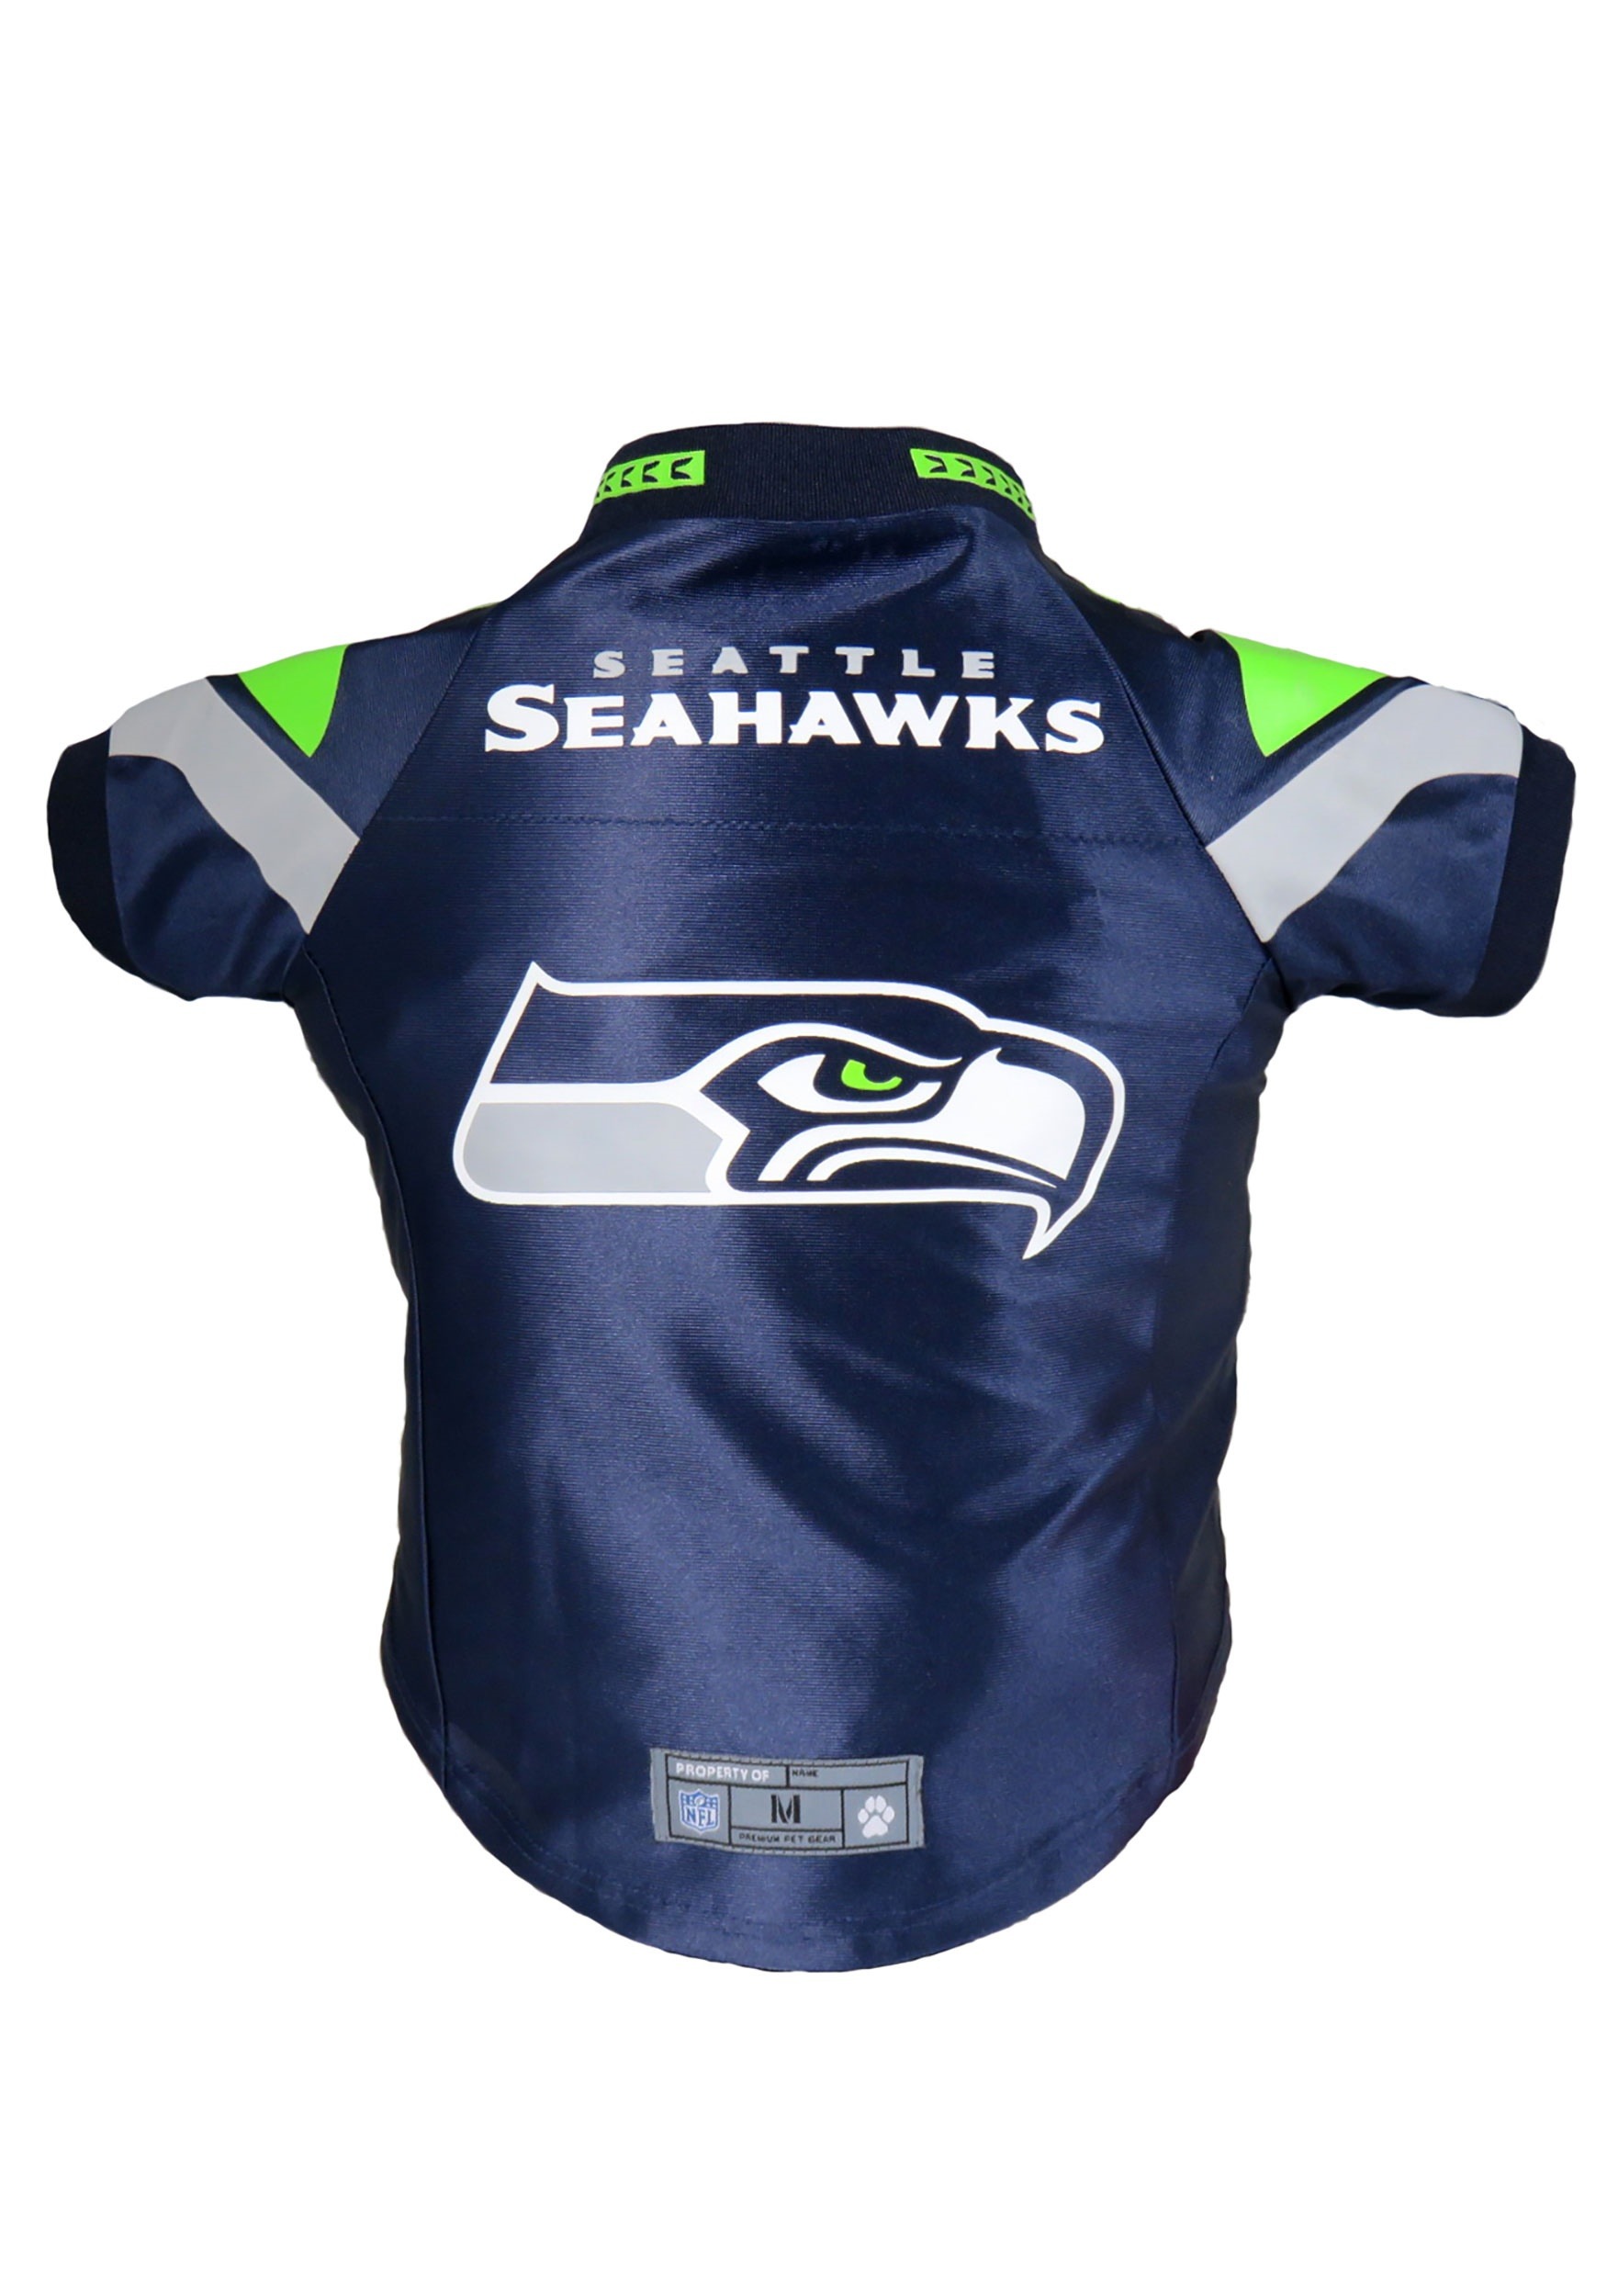 where to get a seahawks jersey